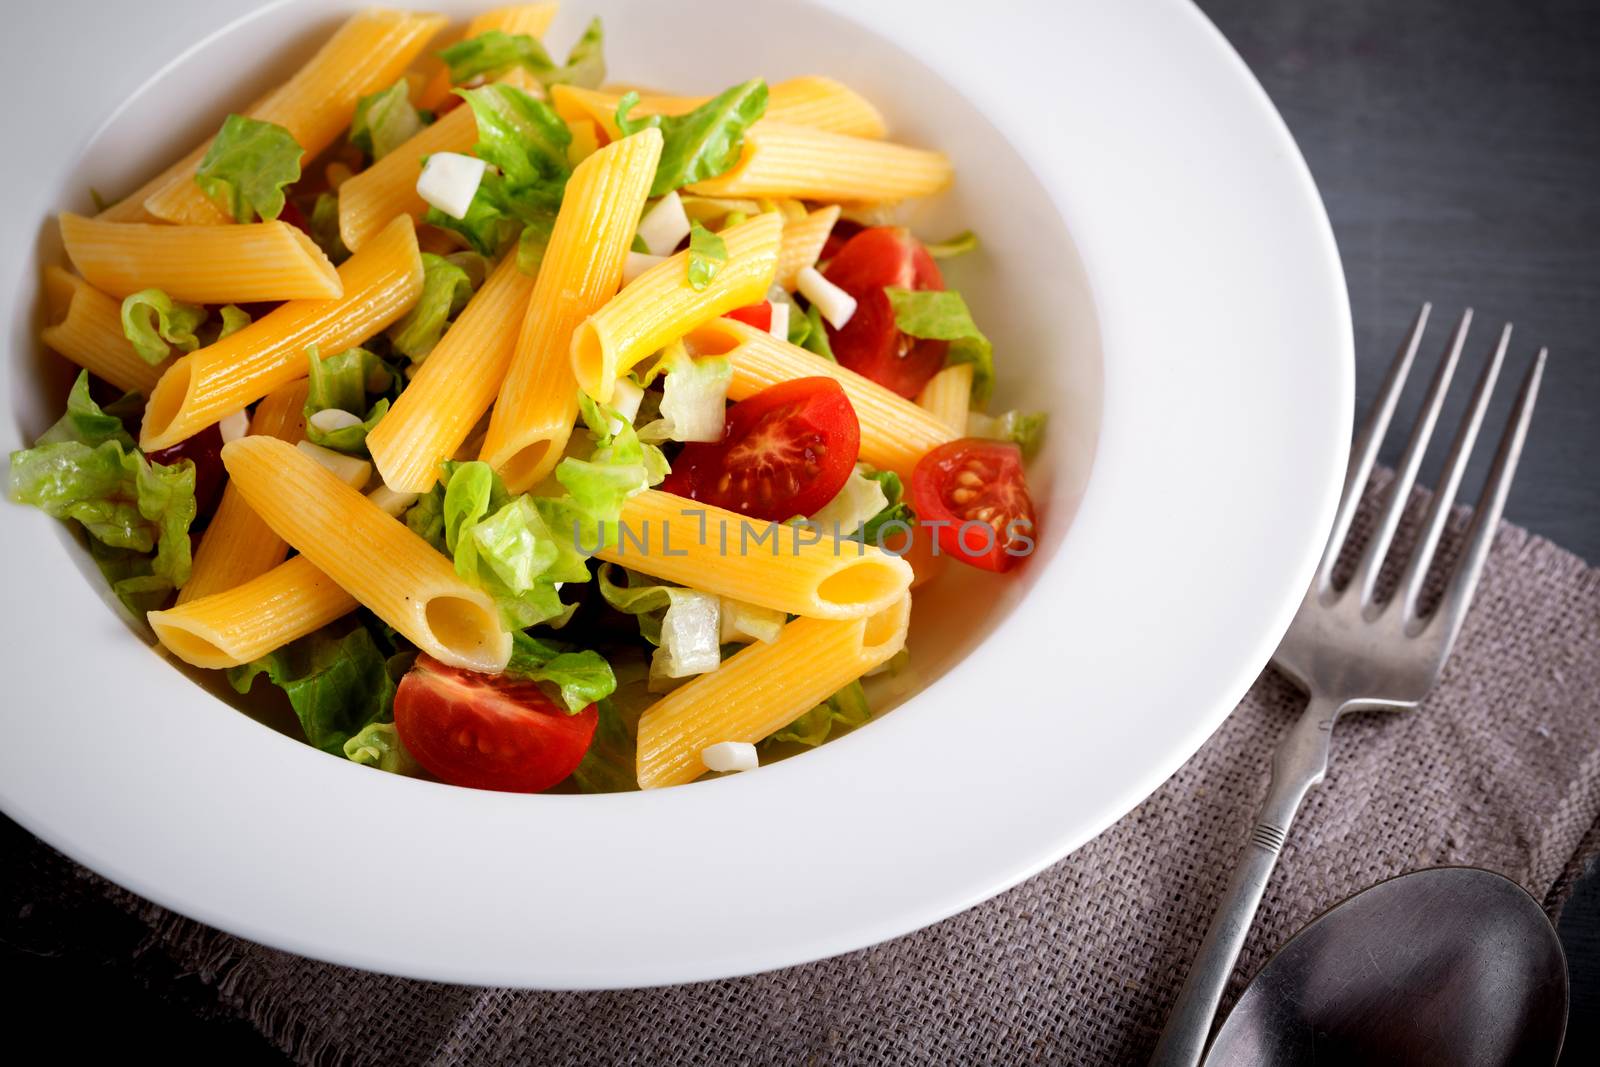 Pasta salad with fresh greenery and tomatos. by supercat67